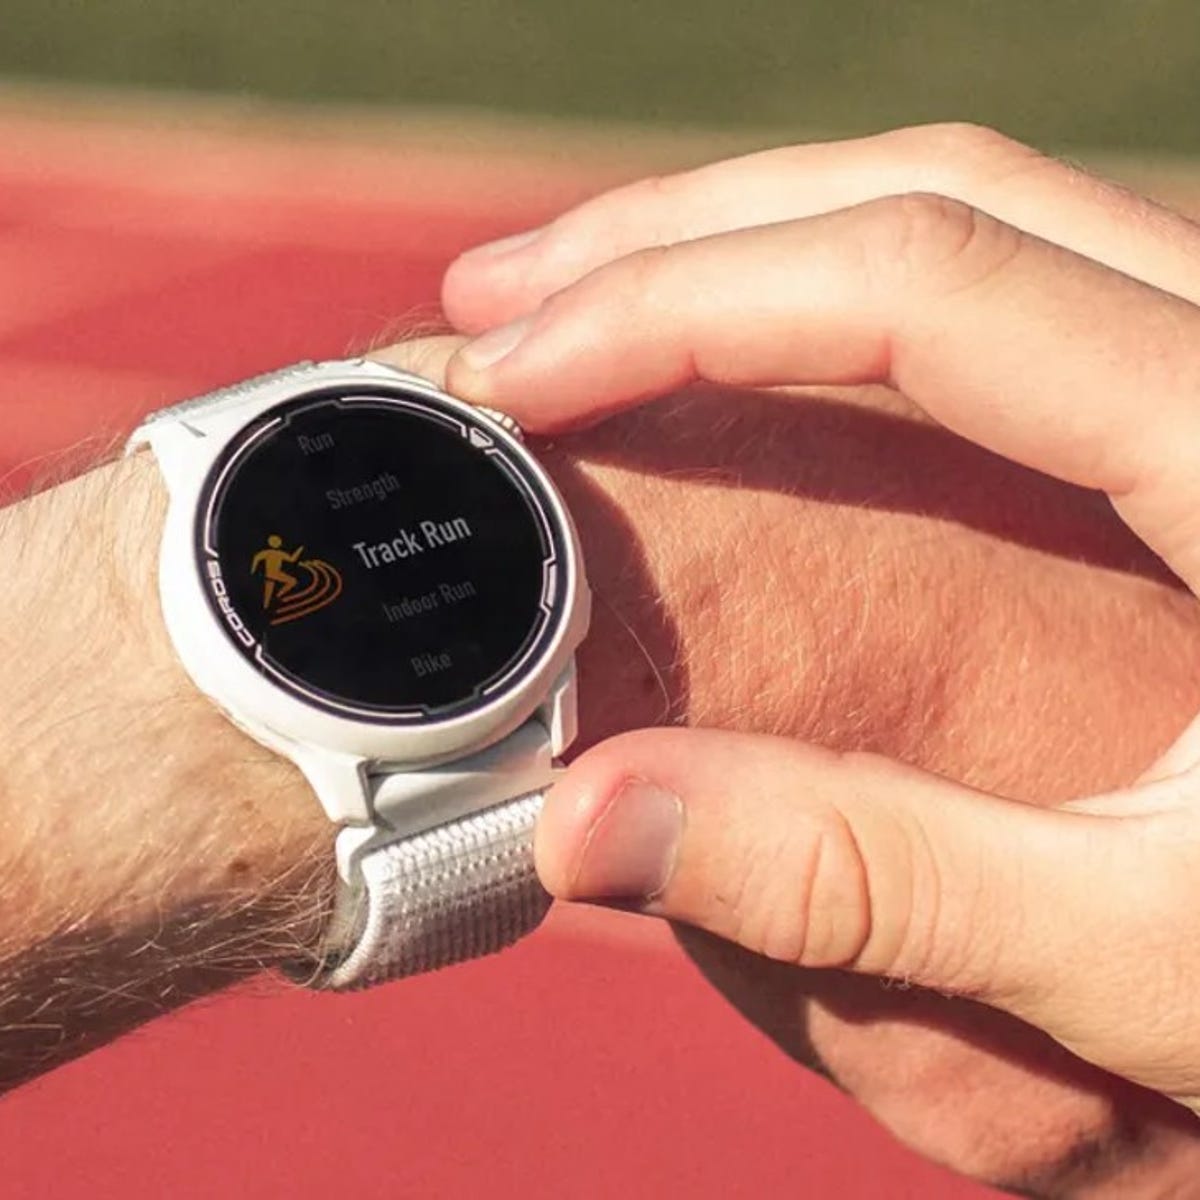 12 best sports watches of according to ZDNET